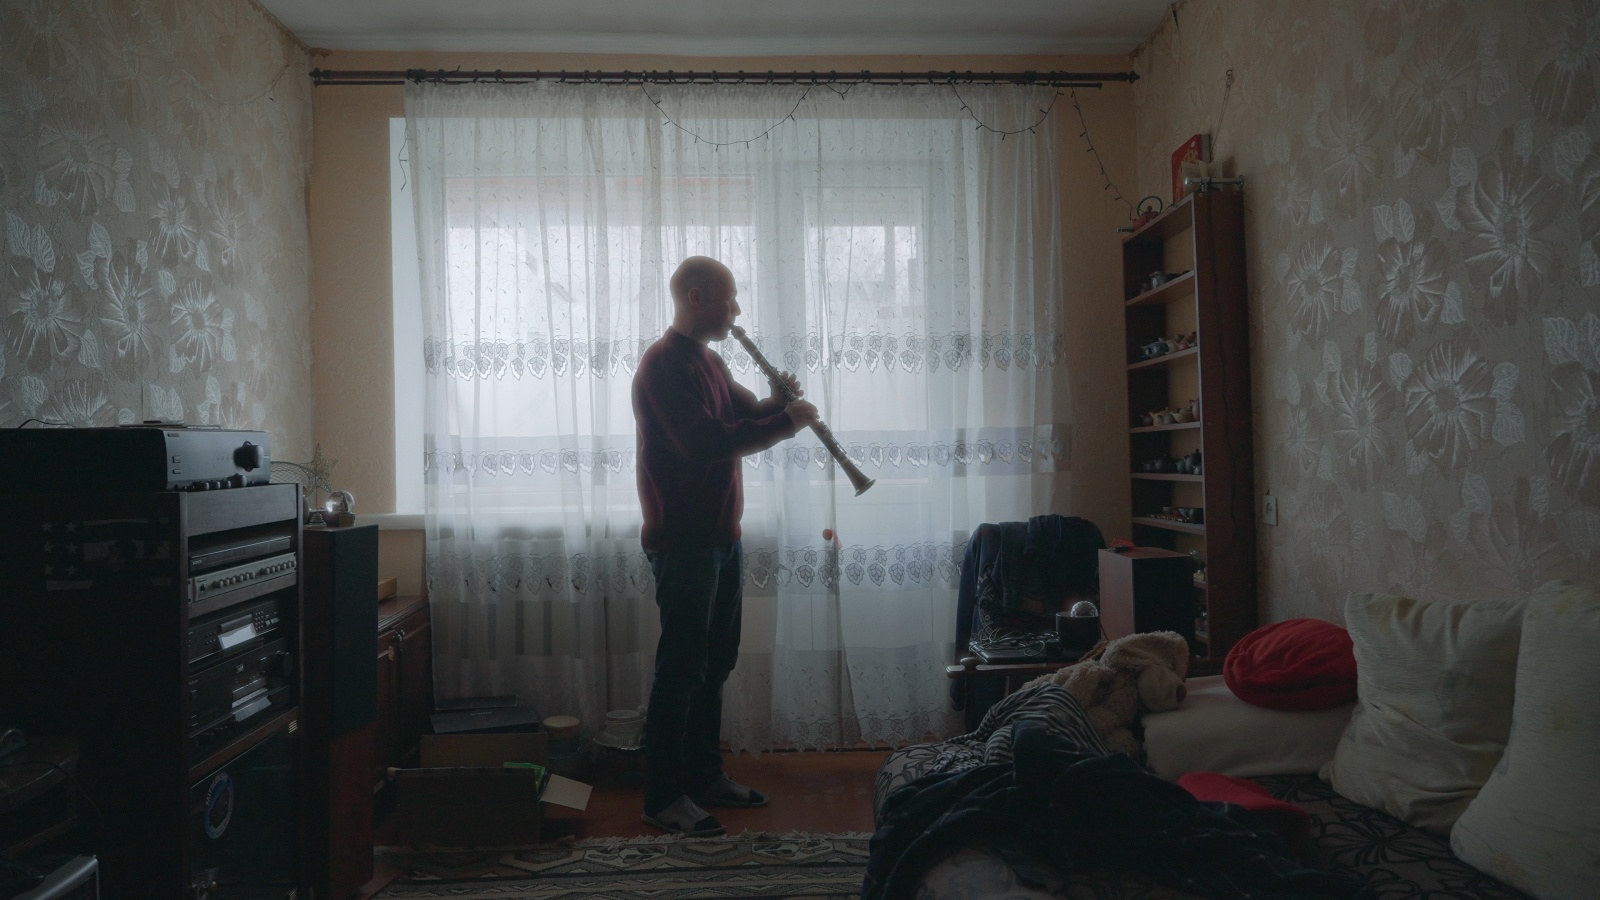 eng: The man is standing in the middle of the room and playing the clarinet.